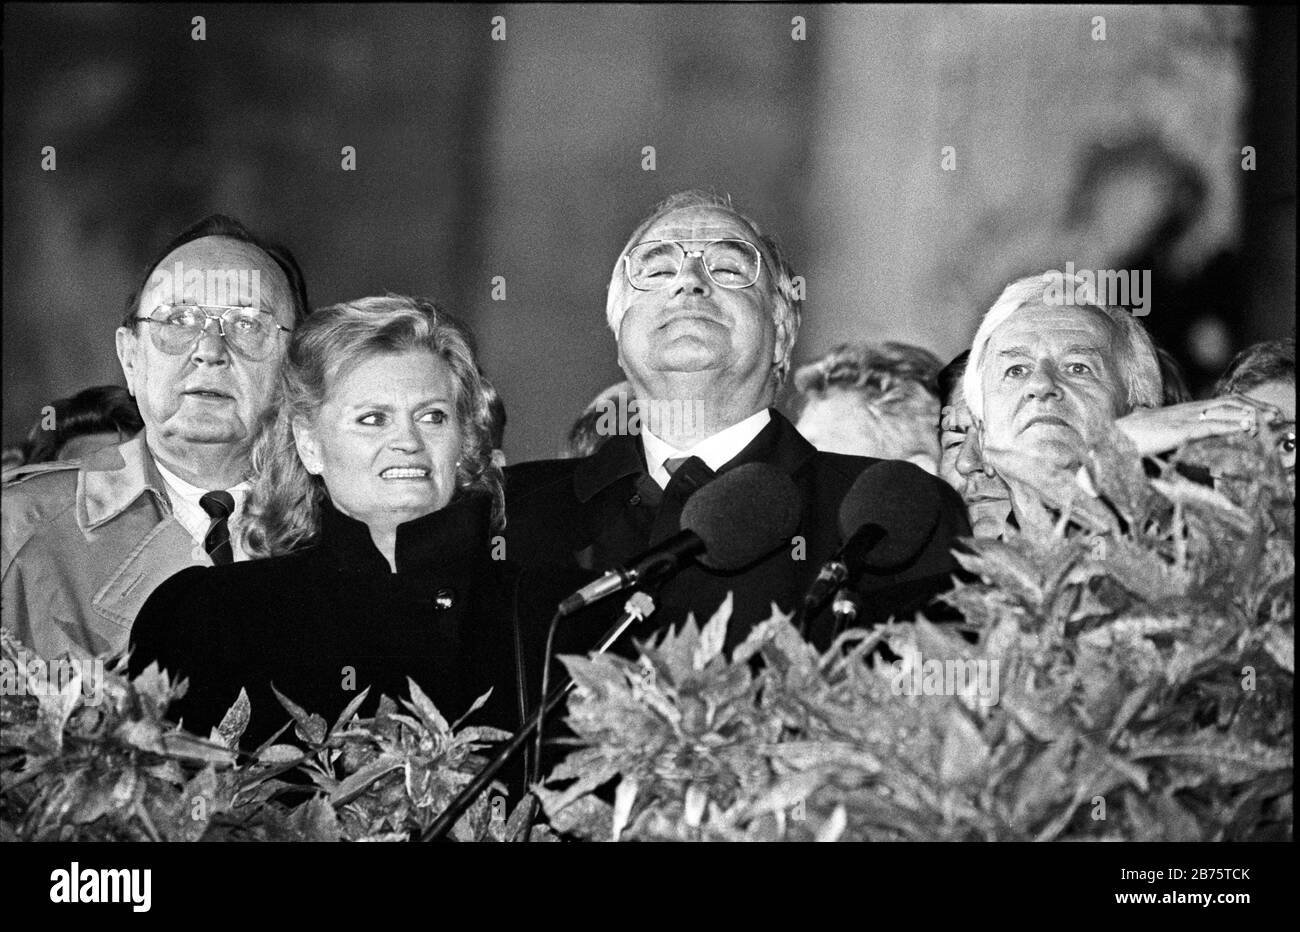 Looking up is Chancellor Helmut Kohl on October 3, 1990 during the celebration of the reunification of Germany at the Berlin Reichstag with Foreign Minister Hans-Dietrich Genscher, Hannelore Kohl and German President Richard von Weizsäcker on October 3, 1990. This picture received a prize at the World Press Photo Award 1991. [automated translation] Stock Photo